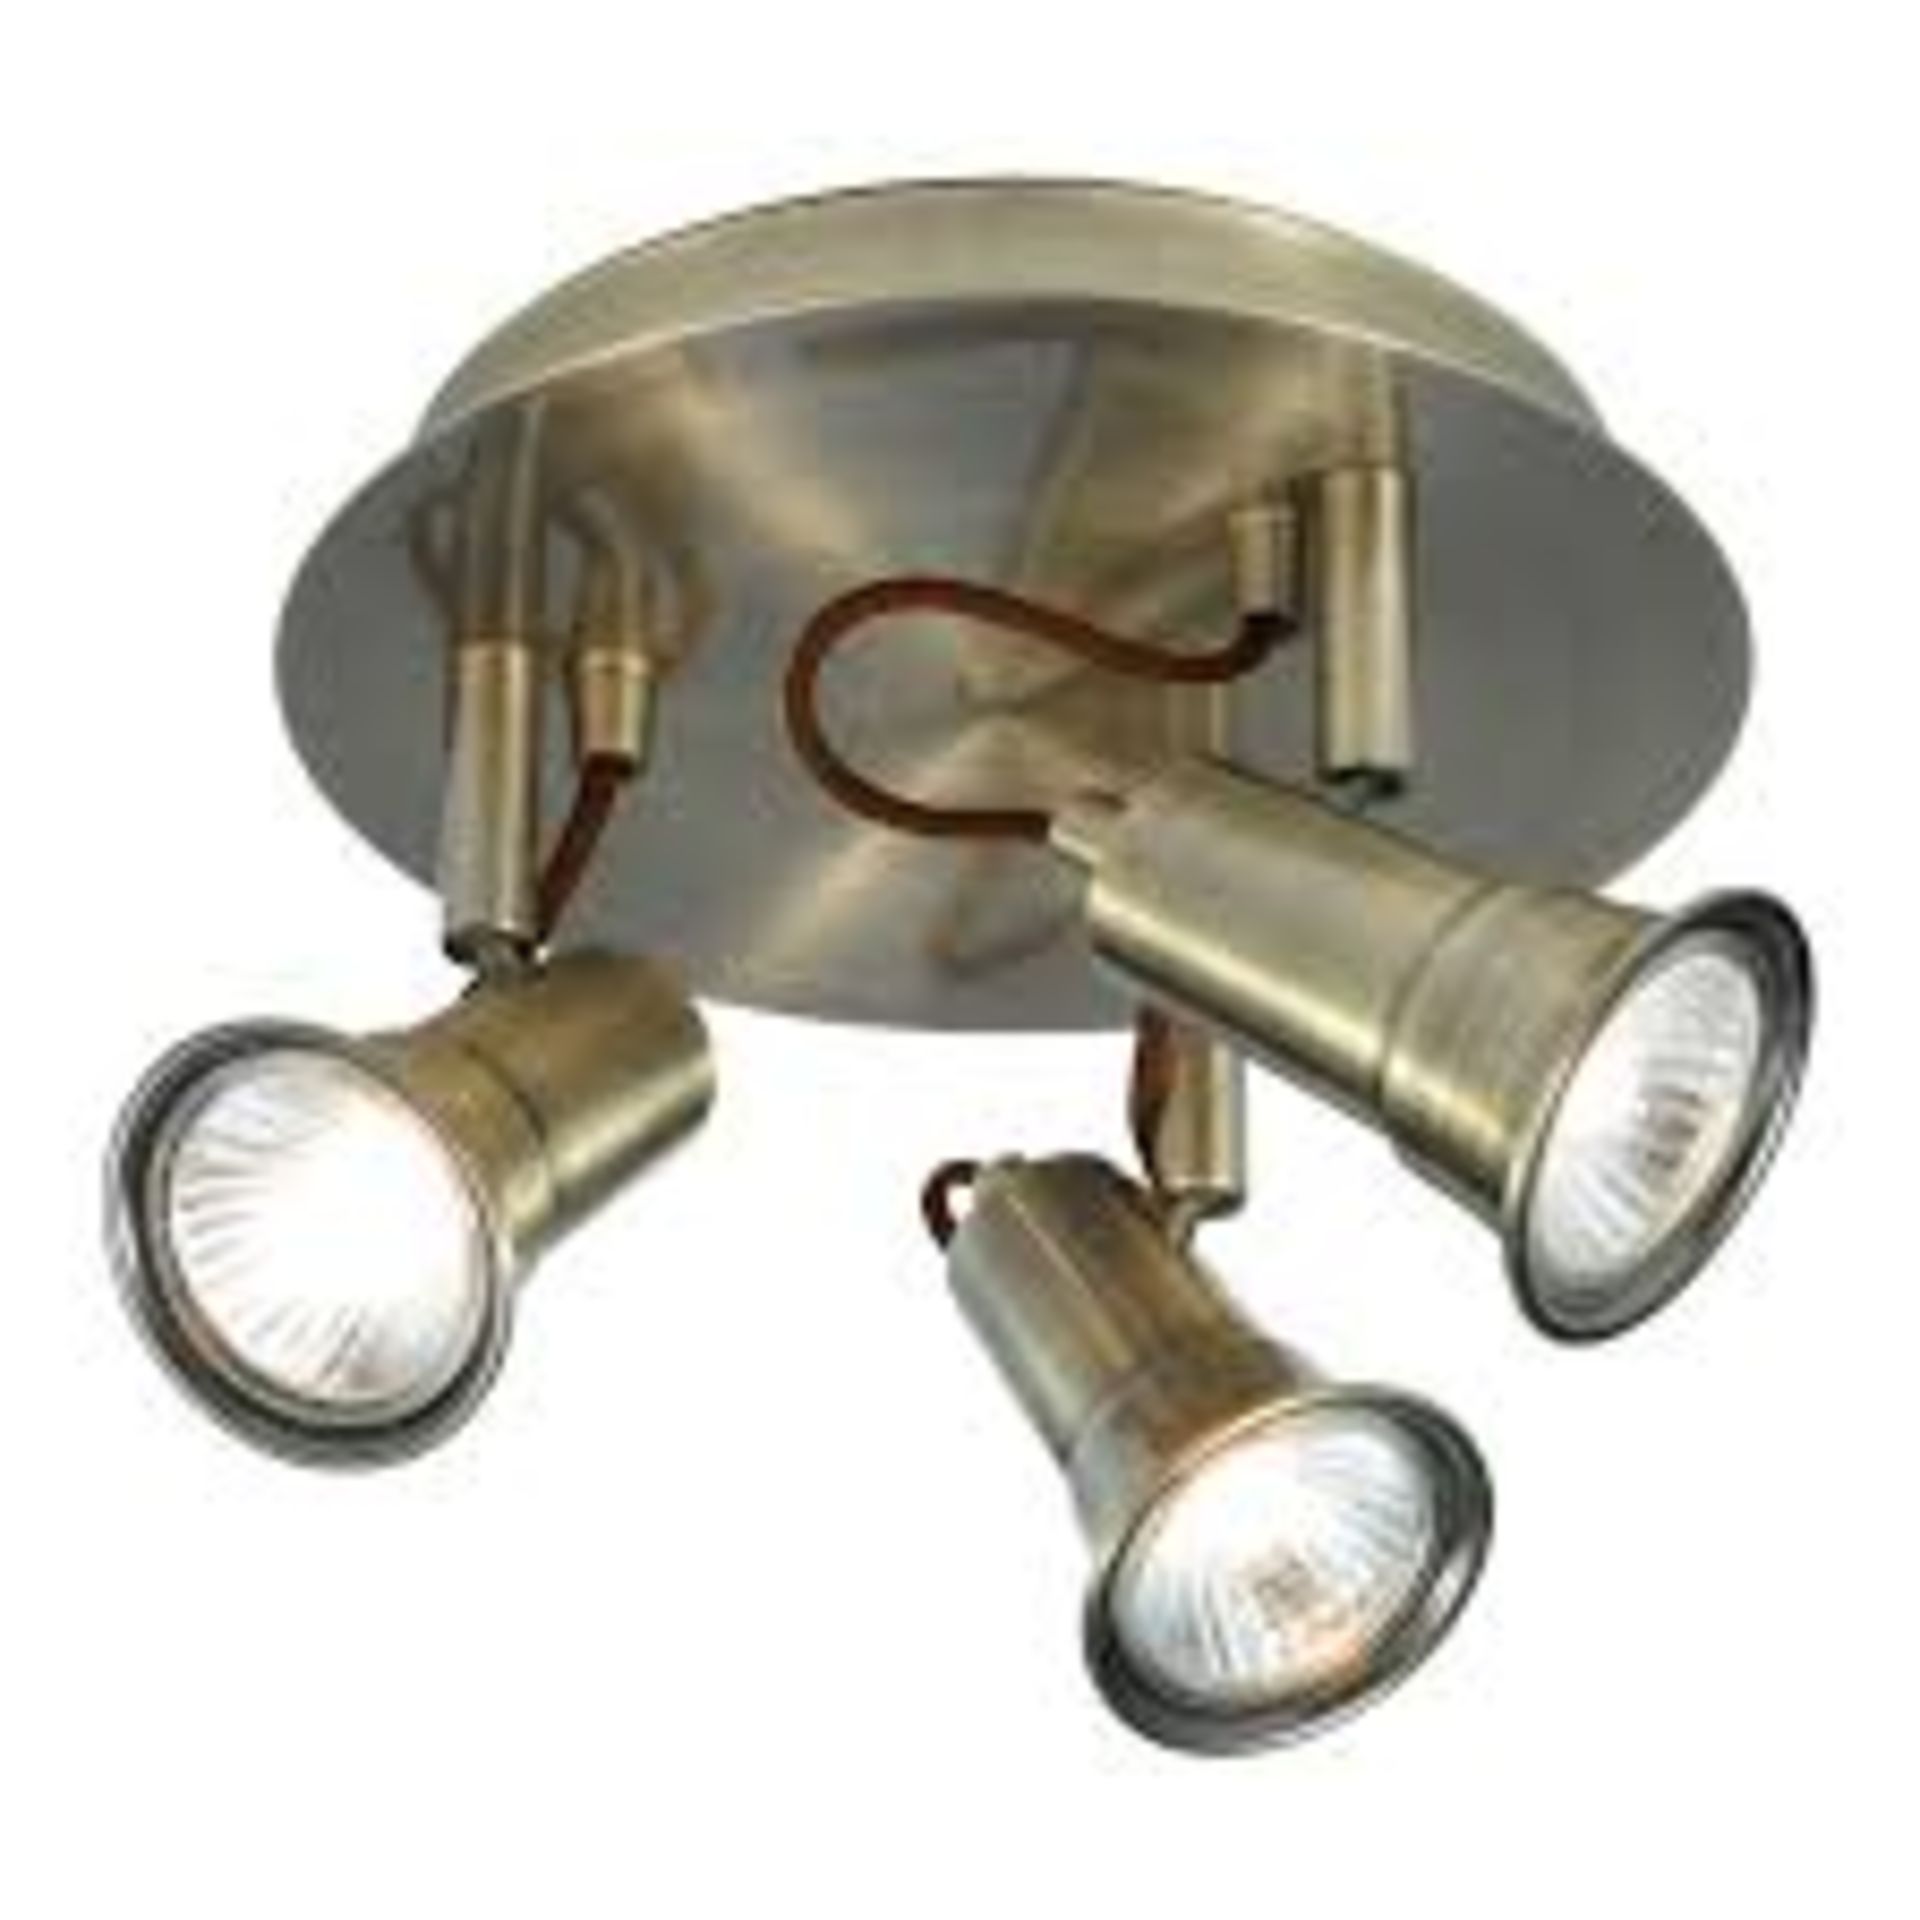 2 x Searchlight Halogen Spot Disc in Antique Brass - Ref: 1223AB - New and Boxed - RRP: £55(each) - Image 2 of 3